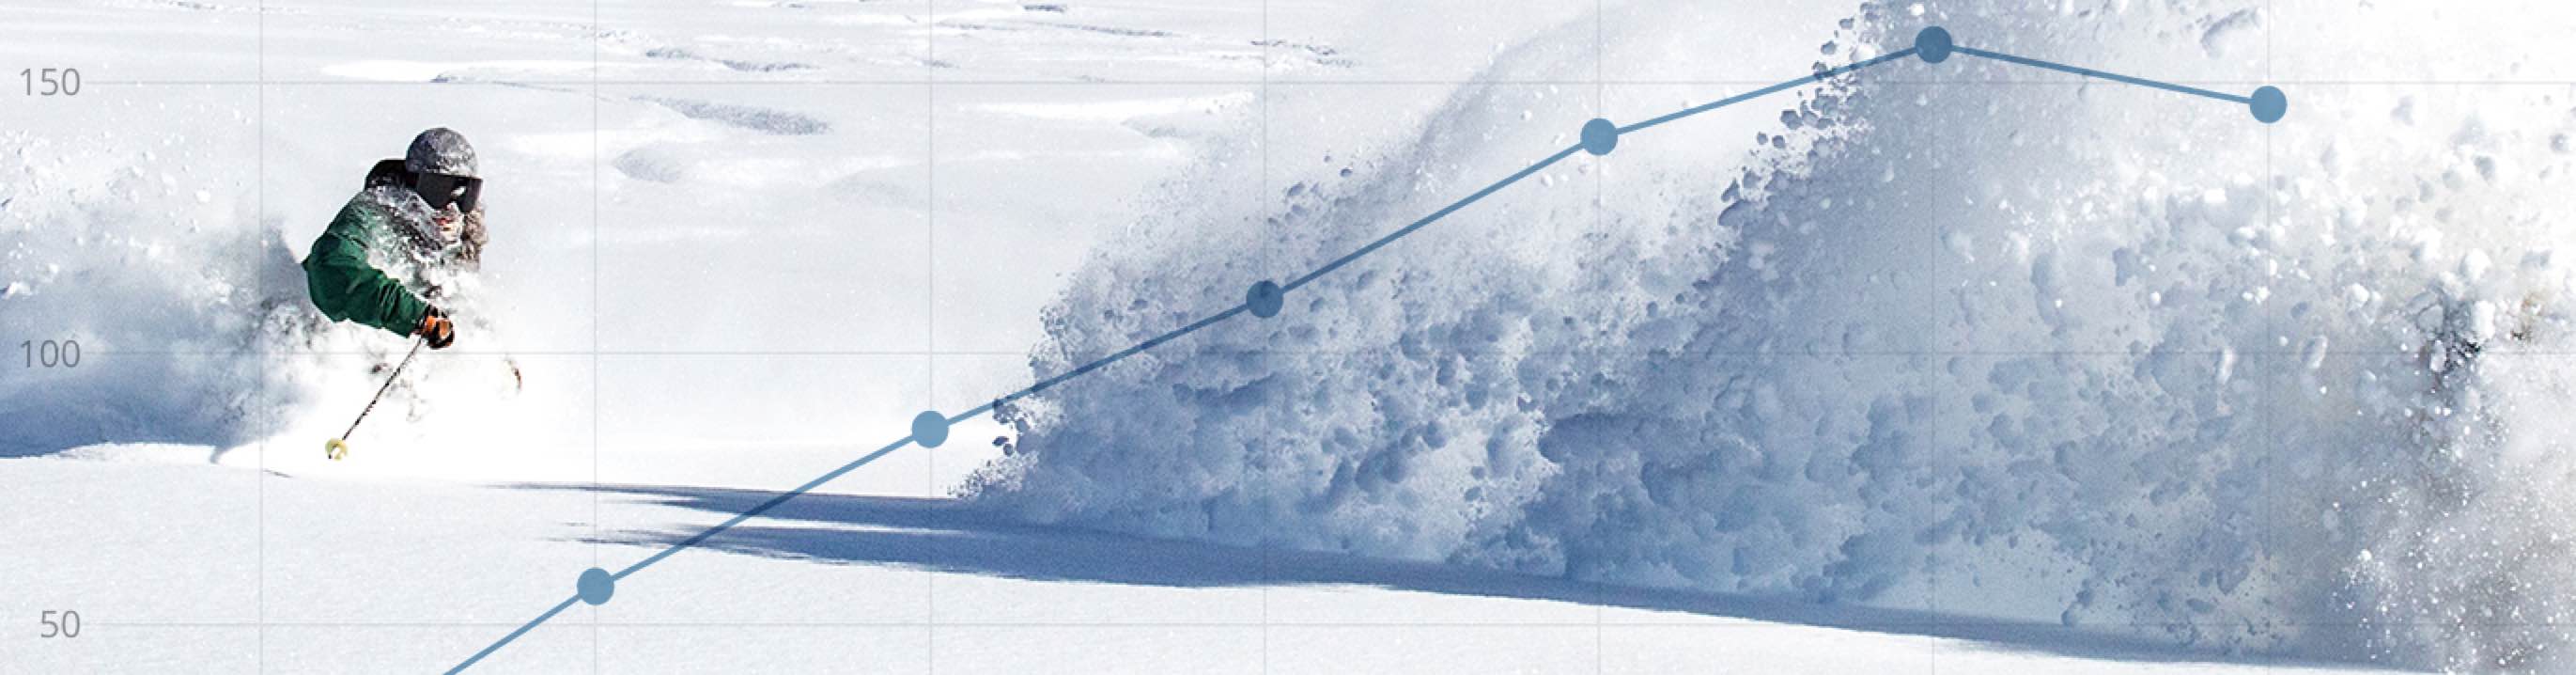 Skier on Palmer with Snow Data Graphic Overlay